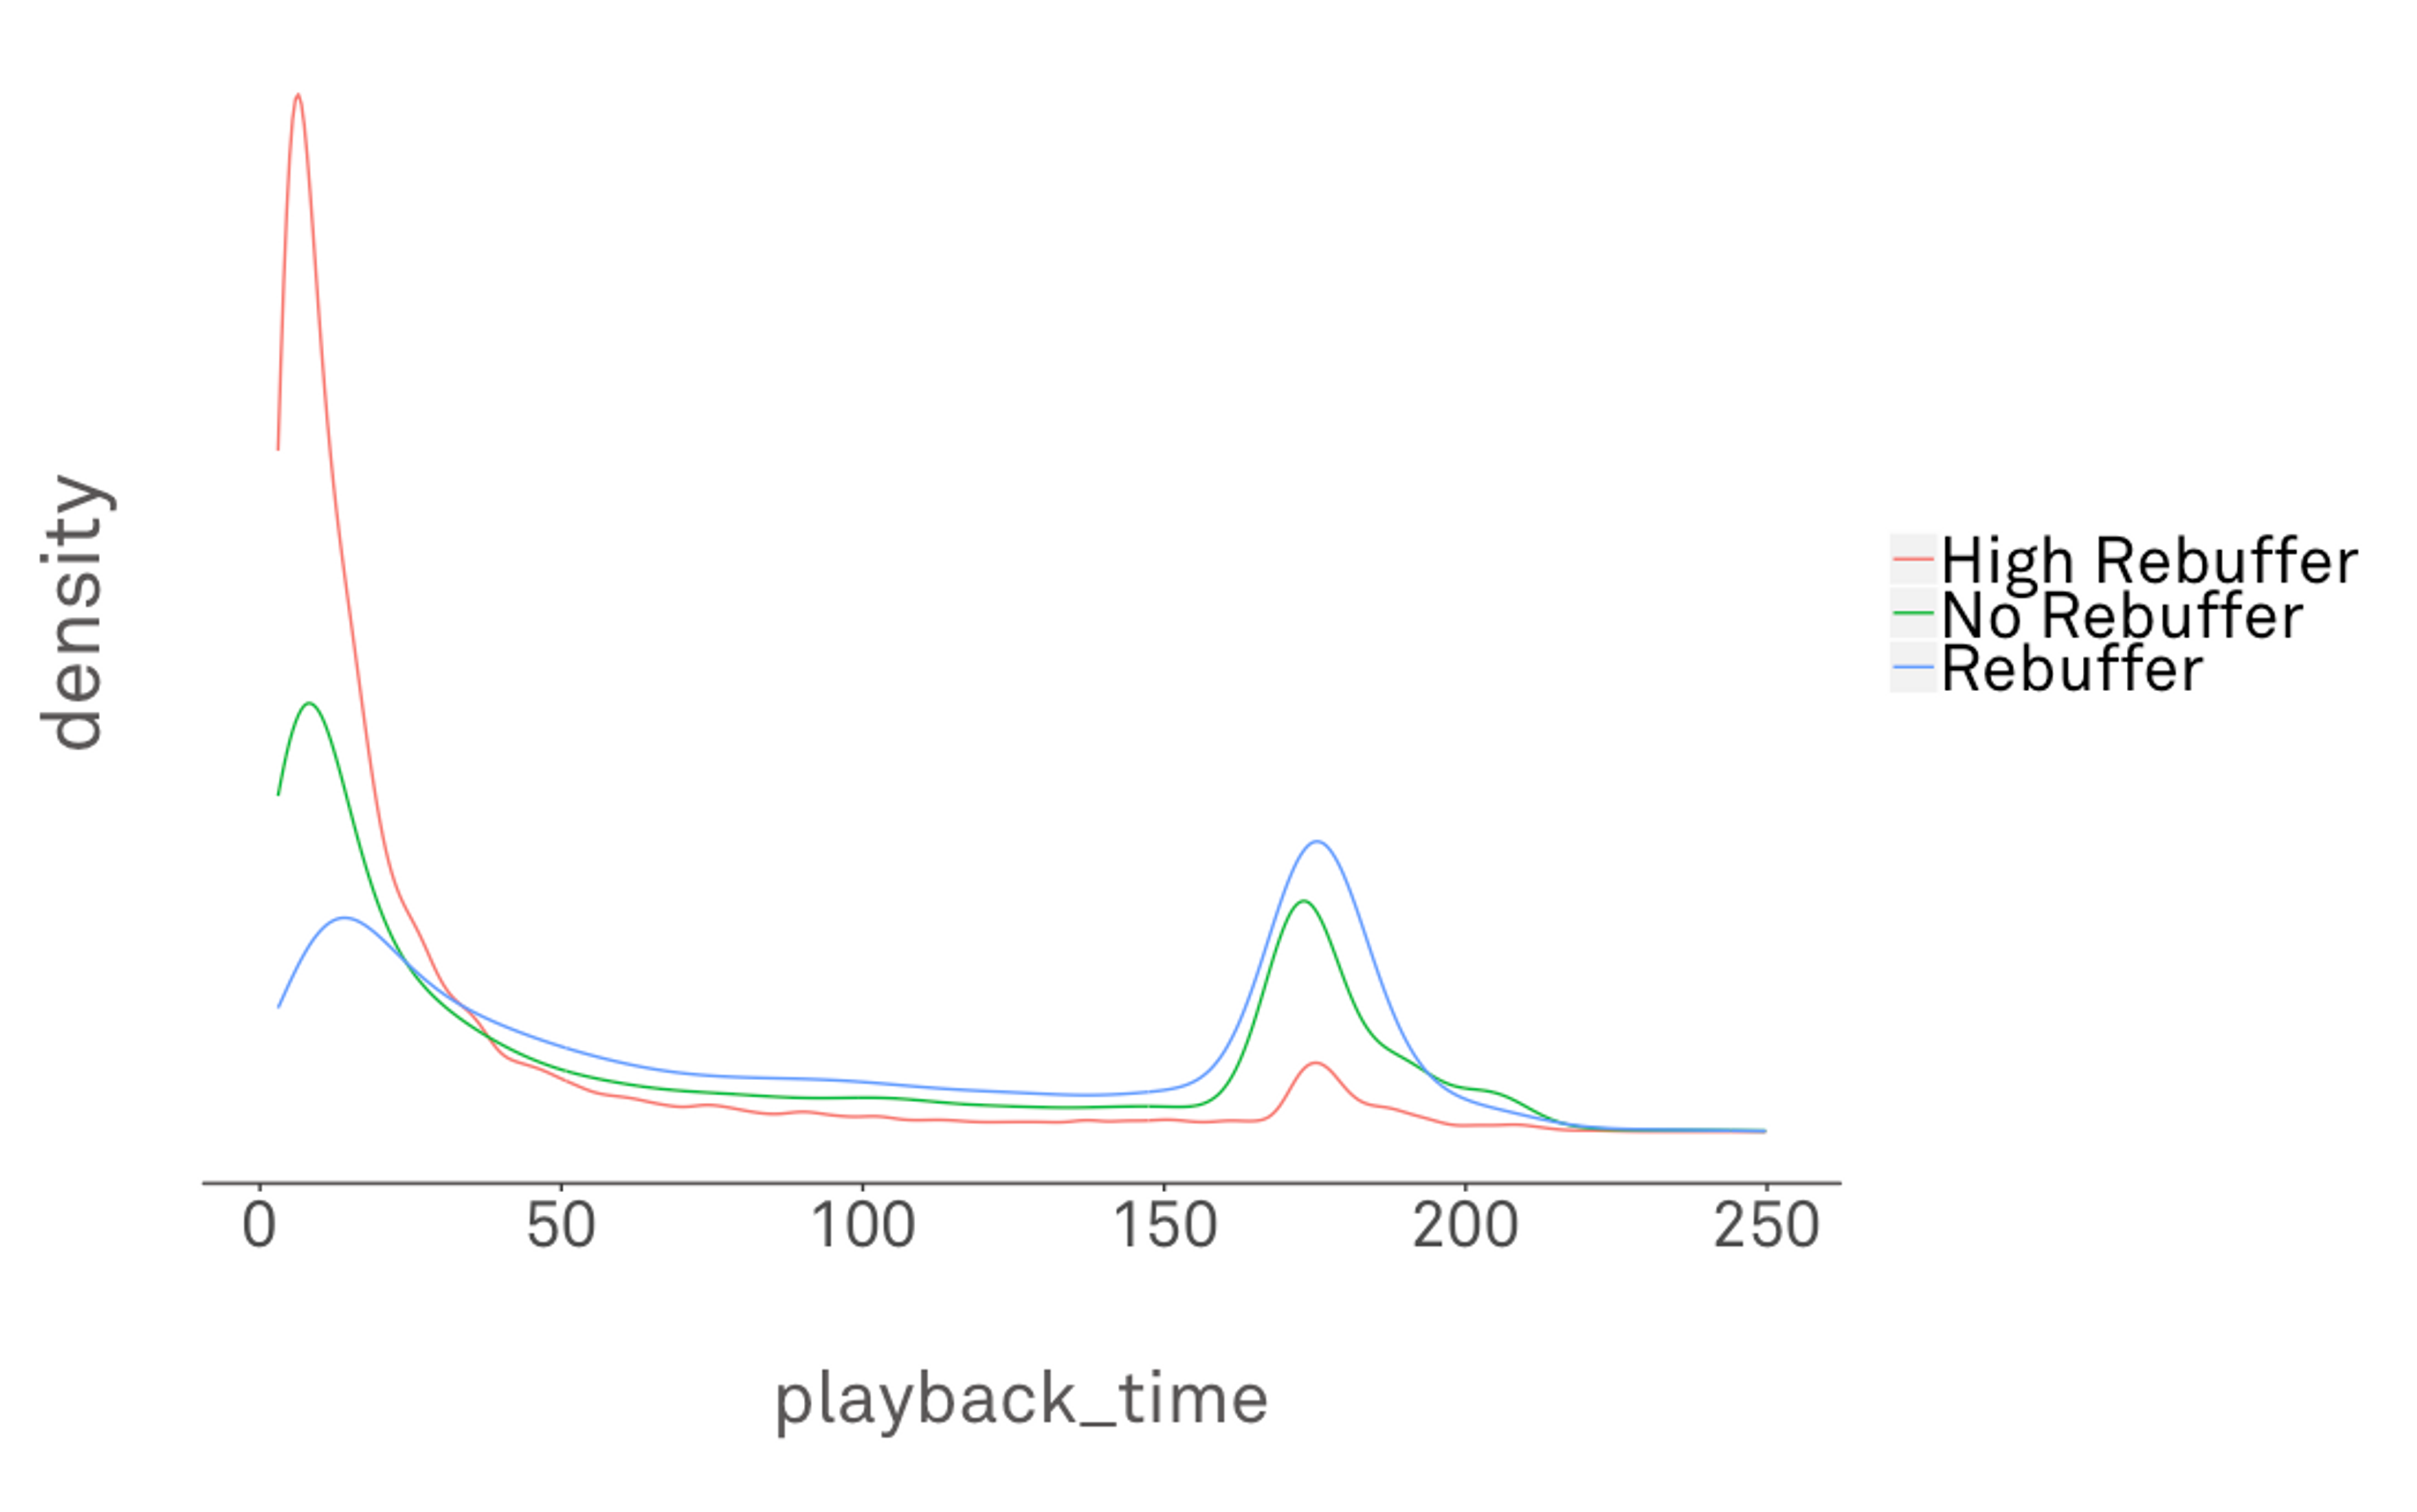 A graph showing the change in playback time